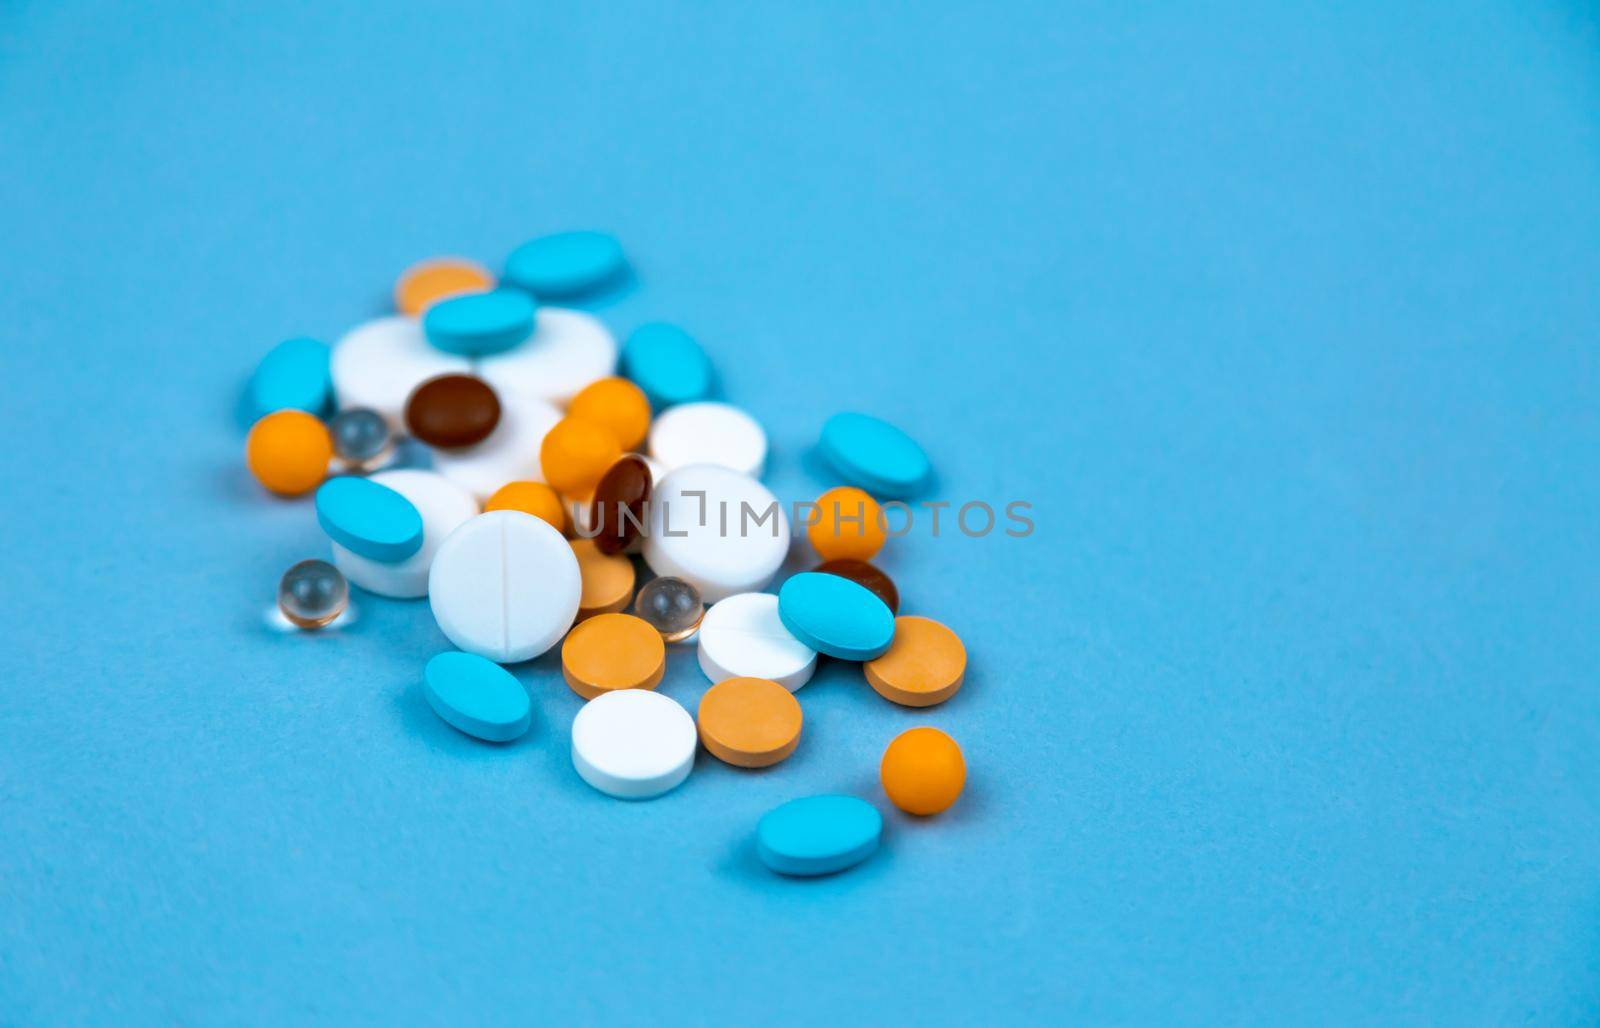 Multi-colored pills on a blue background close-up, with copy space for text by lunarts